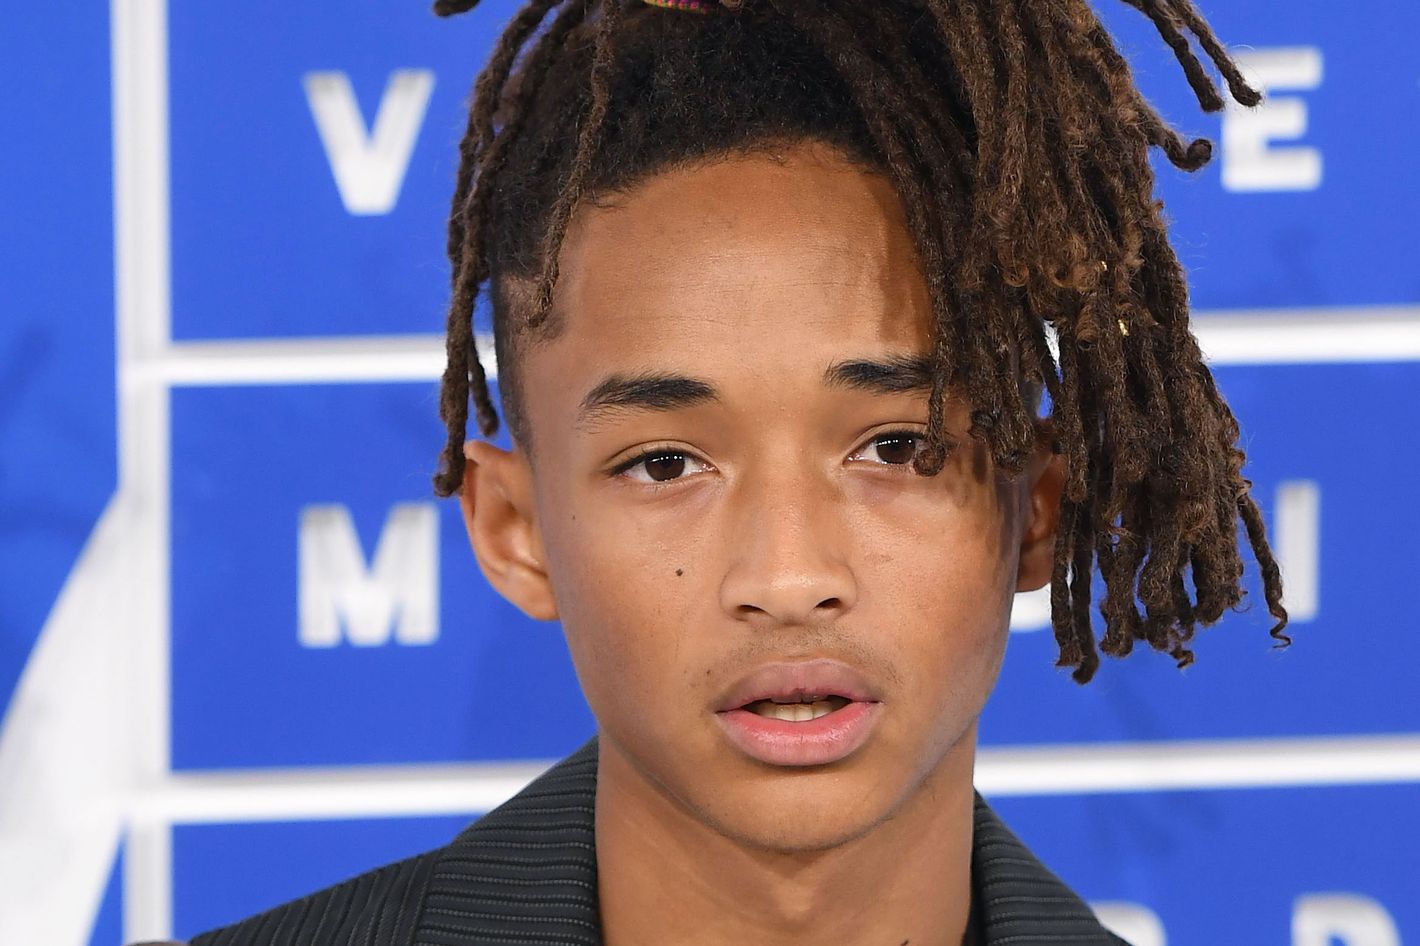 In his 18 years upon this earth, multi-hyphenate prodigy Jaden Smith has be...